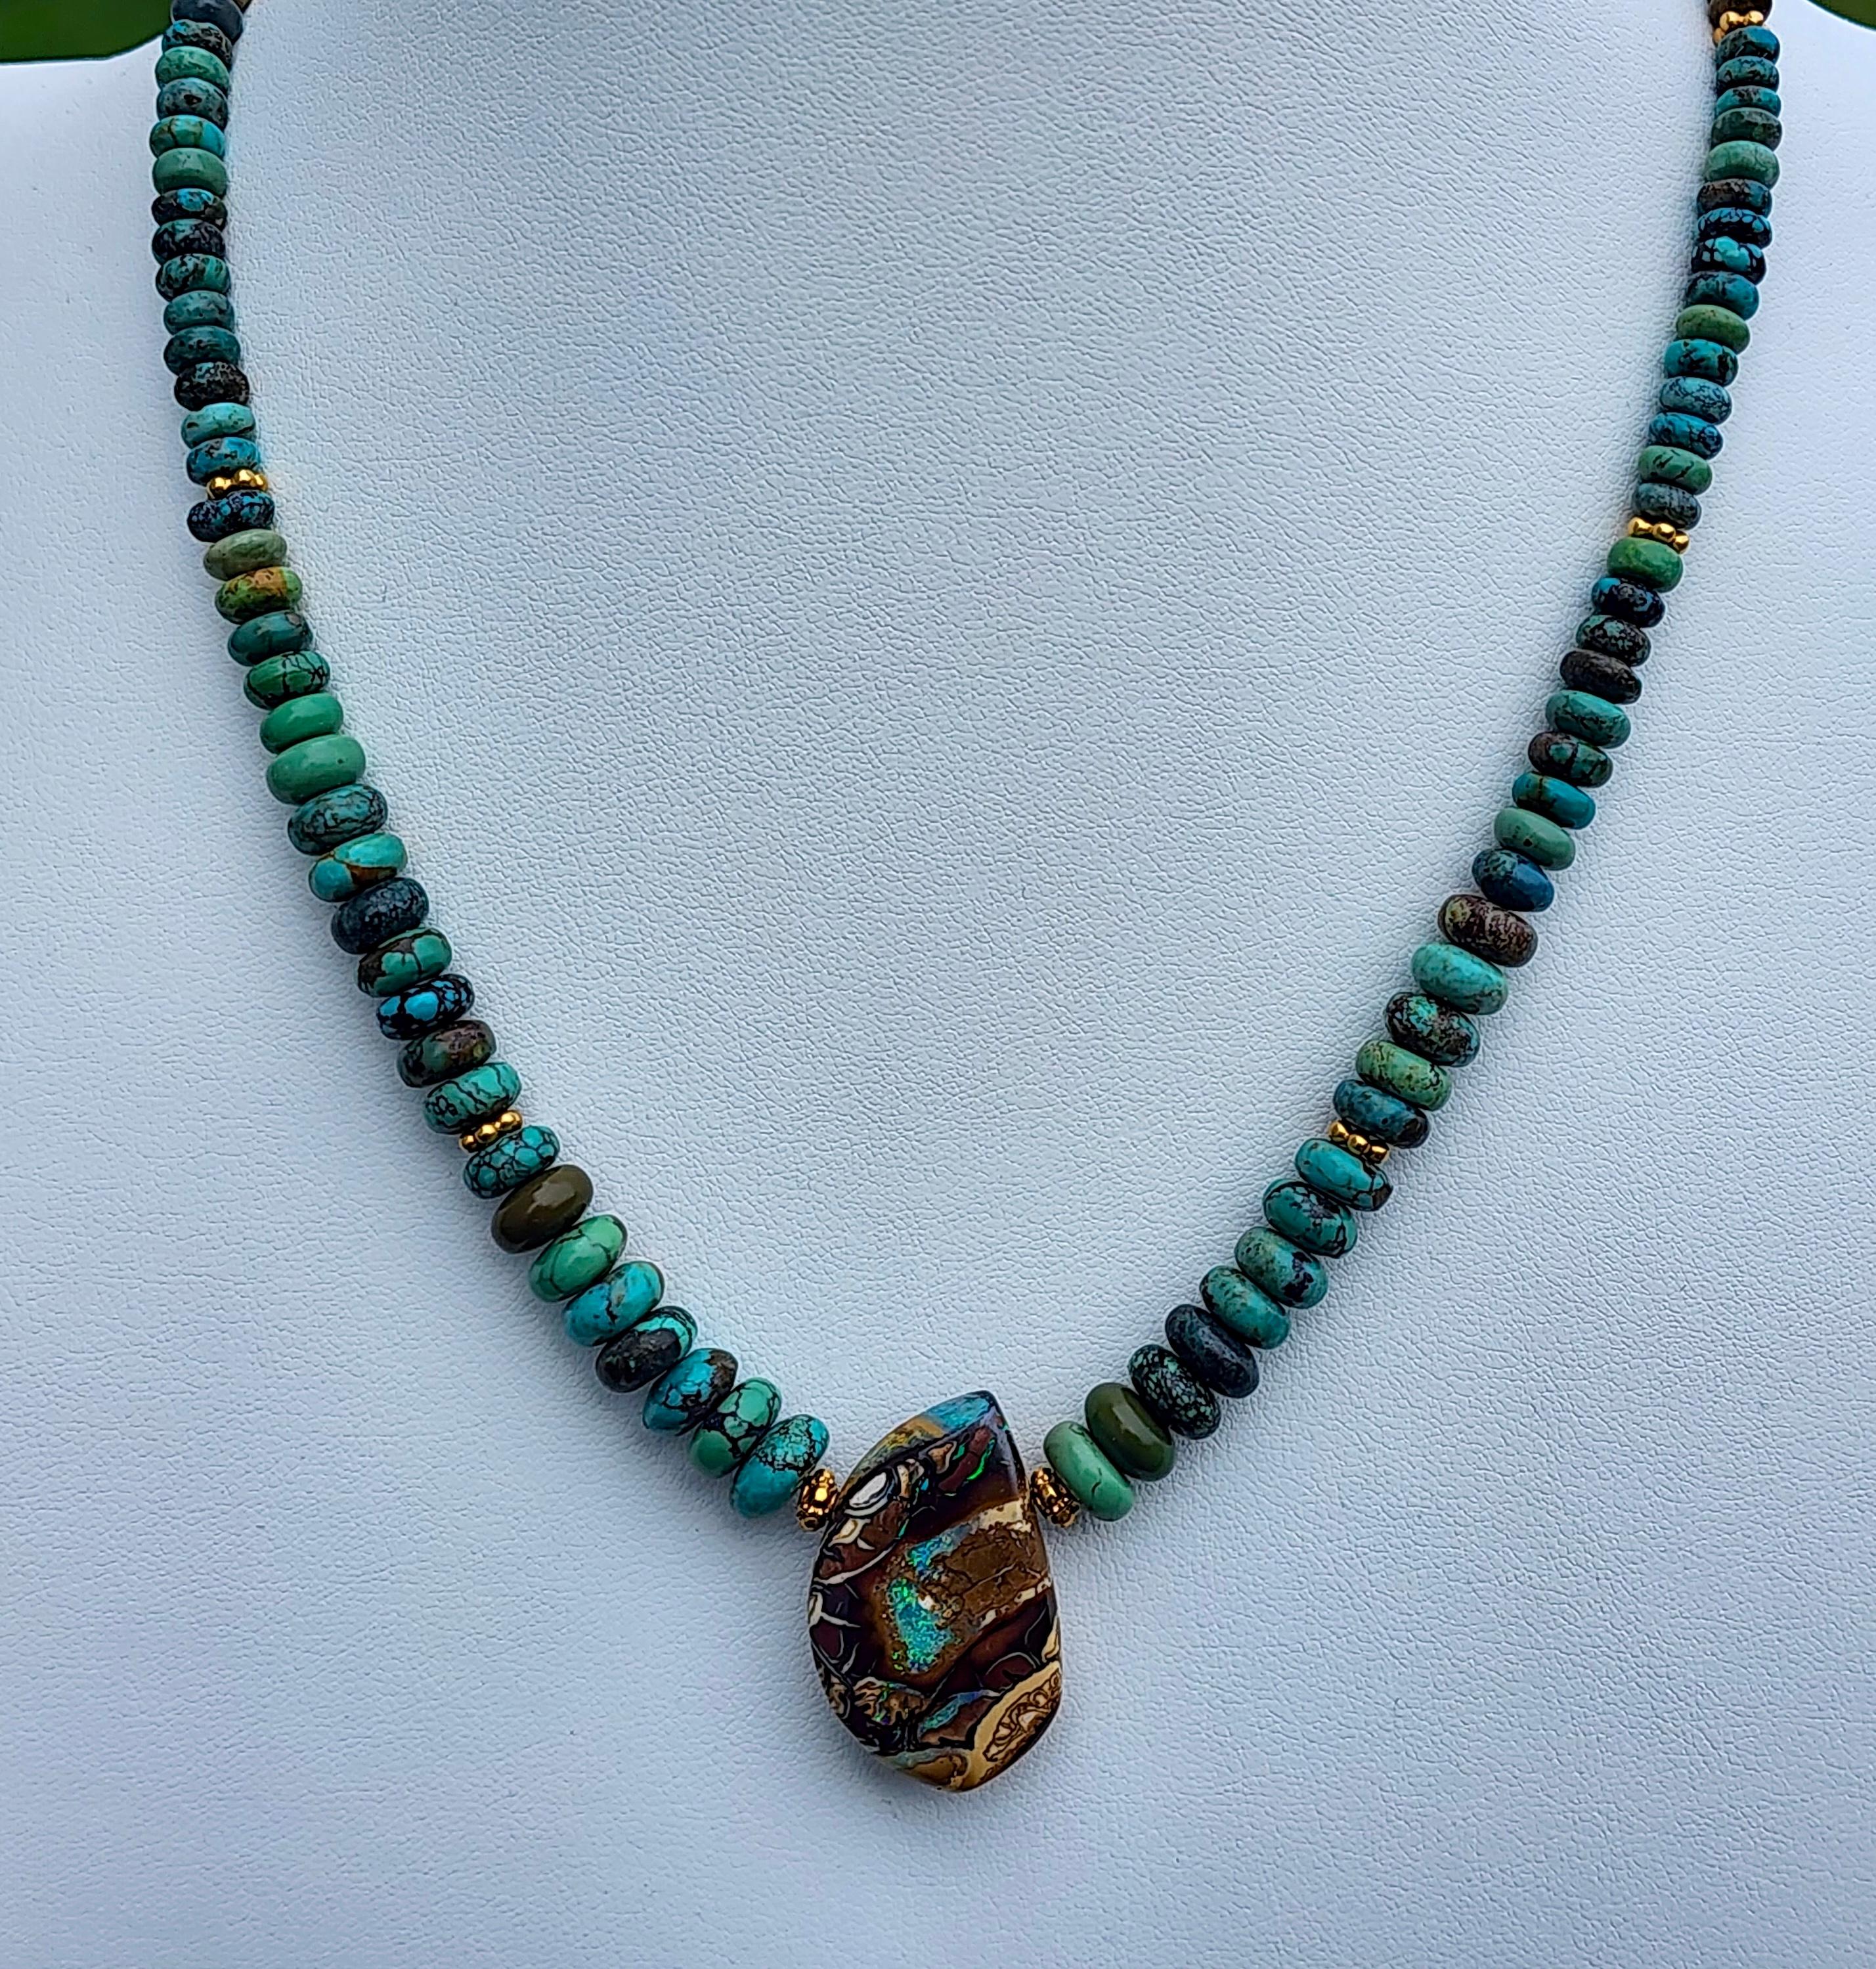 Women's or Men's A Turquoise Beaded Necklace with an Australian Boulder Opal Pendant. For Sale